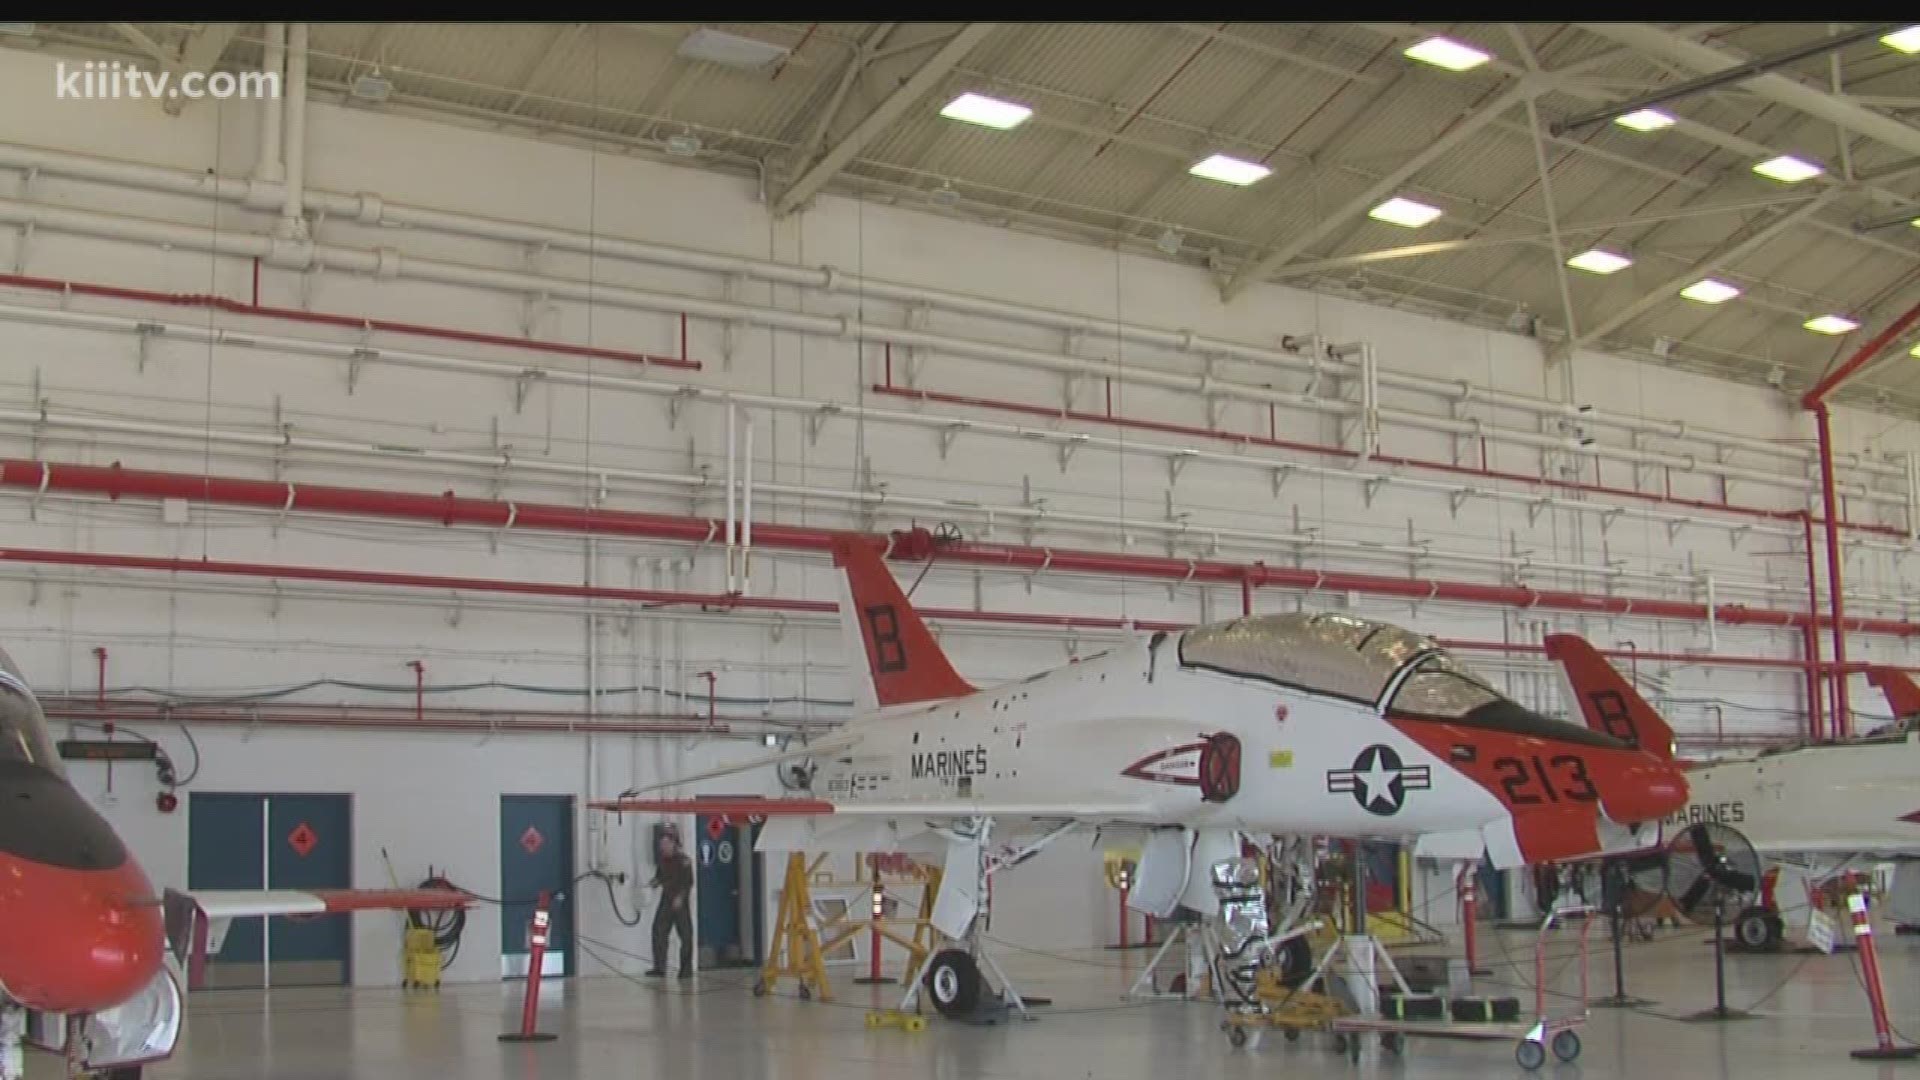 Naval Air Station-Kingsville celebrated the completion of an $18 million project Friday that has been three years in the making.